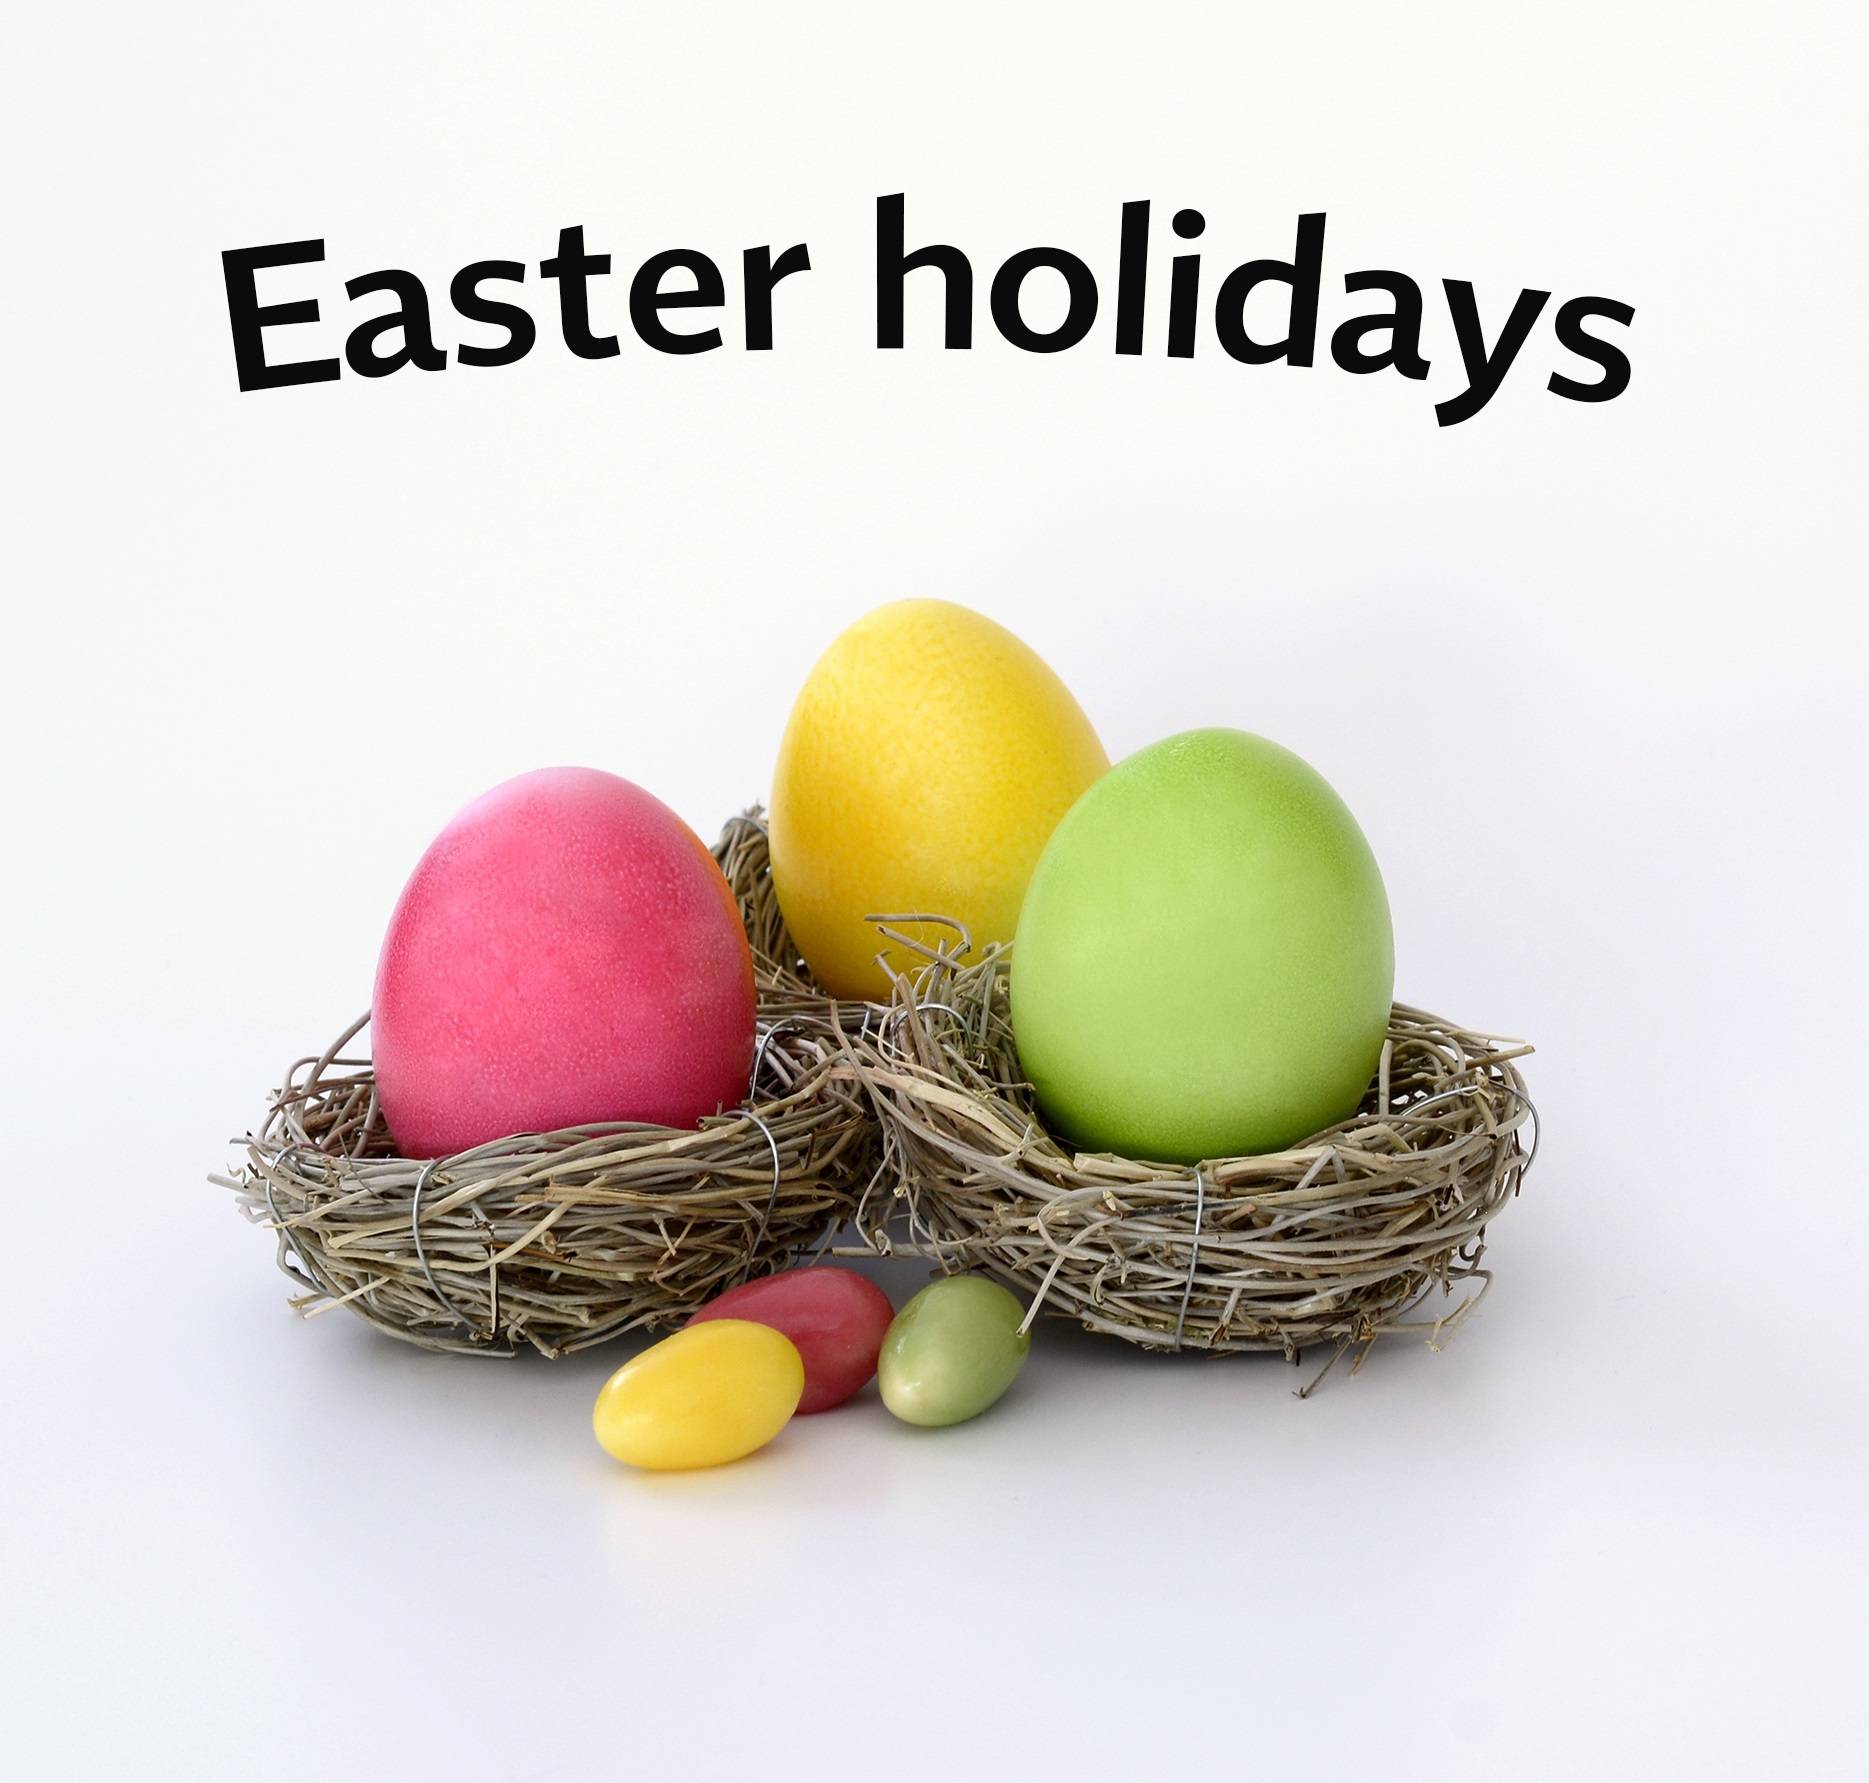 TOMCAT offices closed for the Easter holidays 